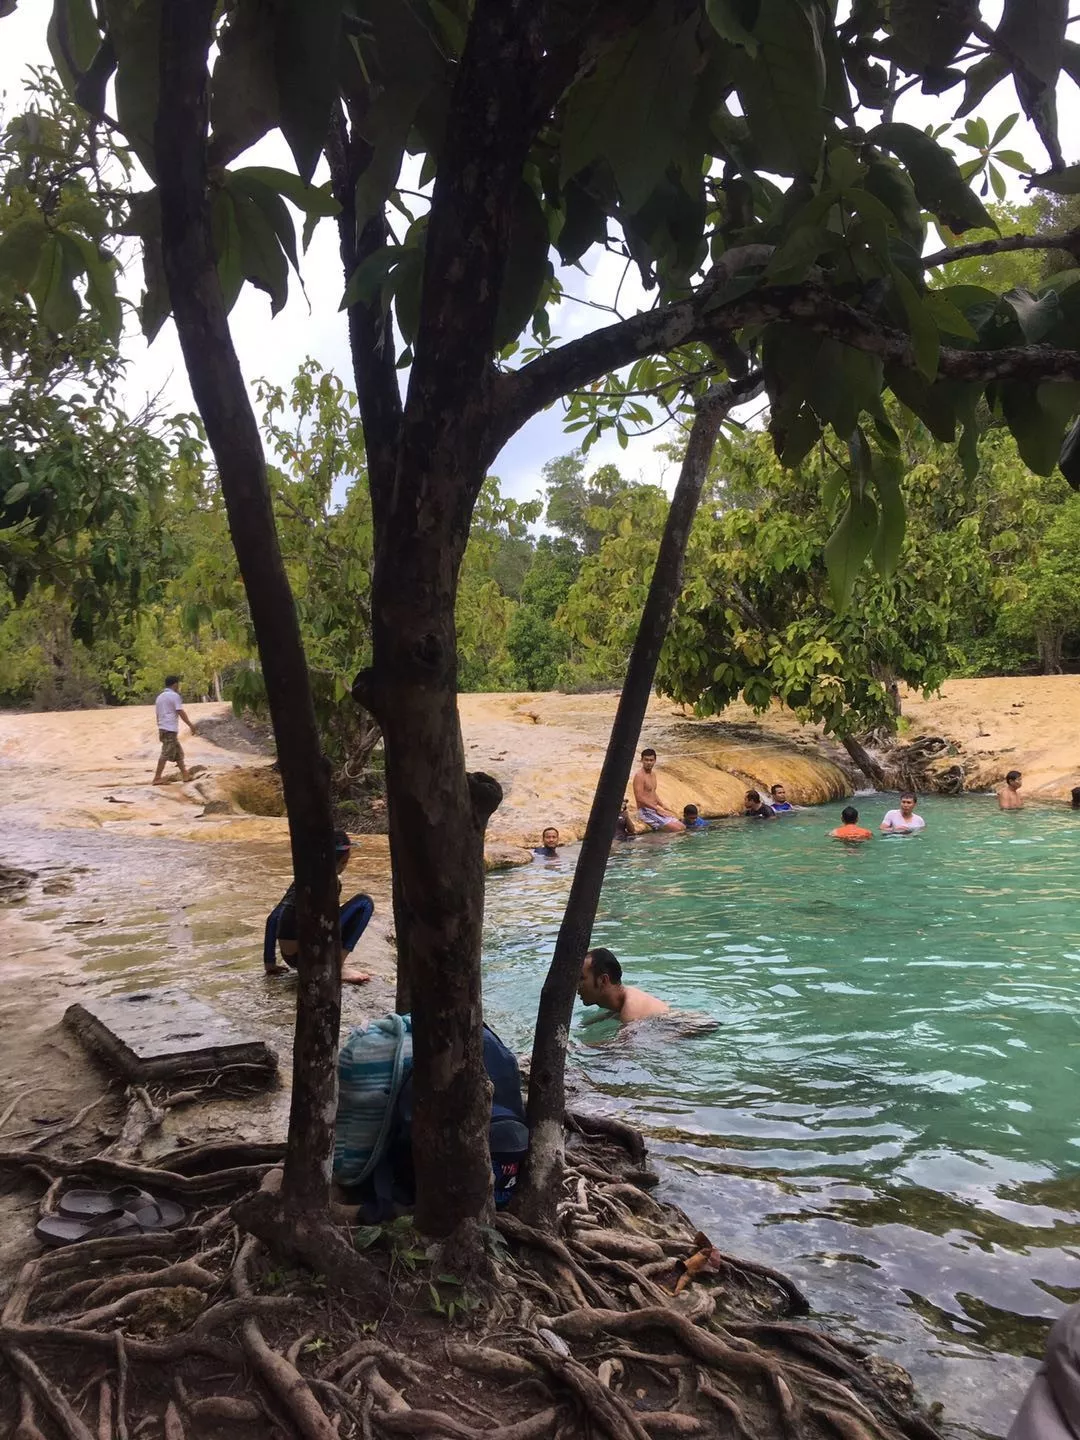 Krabi-"7-Day Family Travel Guide to Thailand" In Krabi, Thailand, everyone I met smiled at me